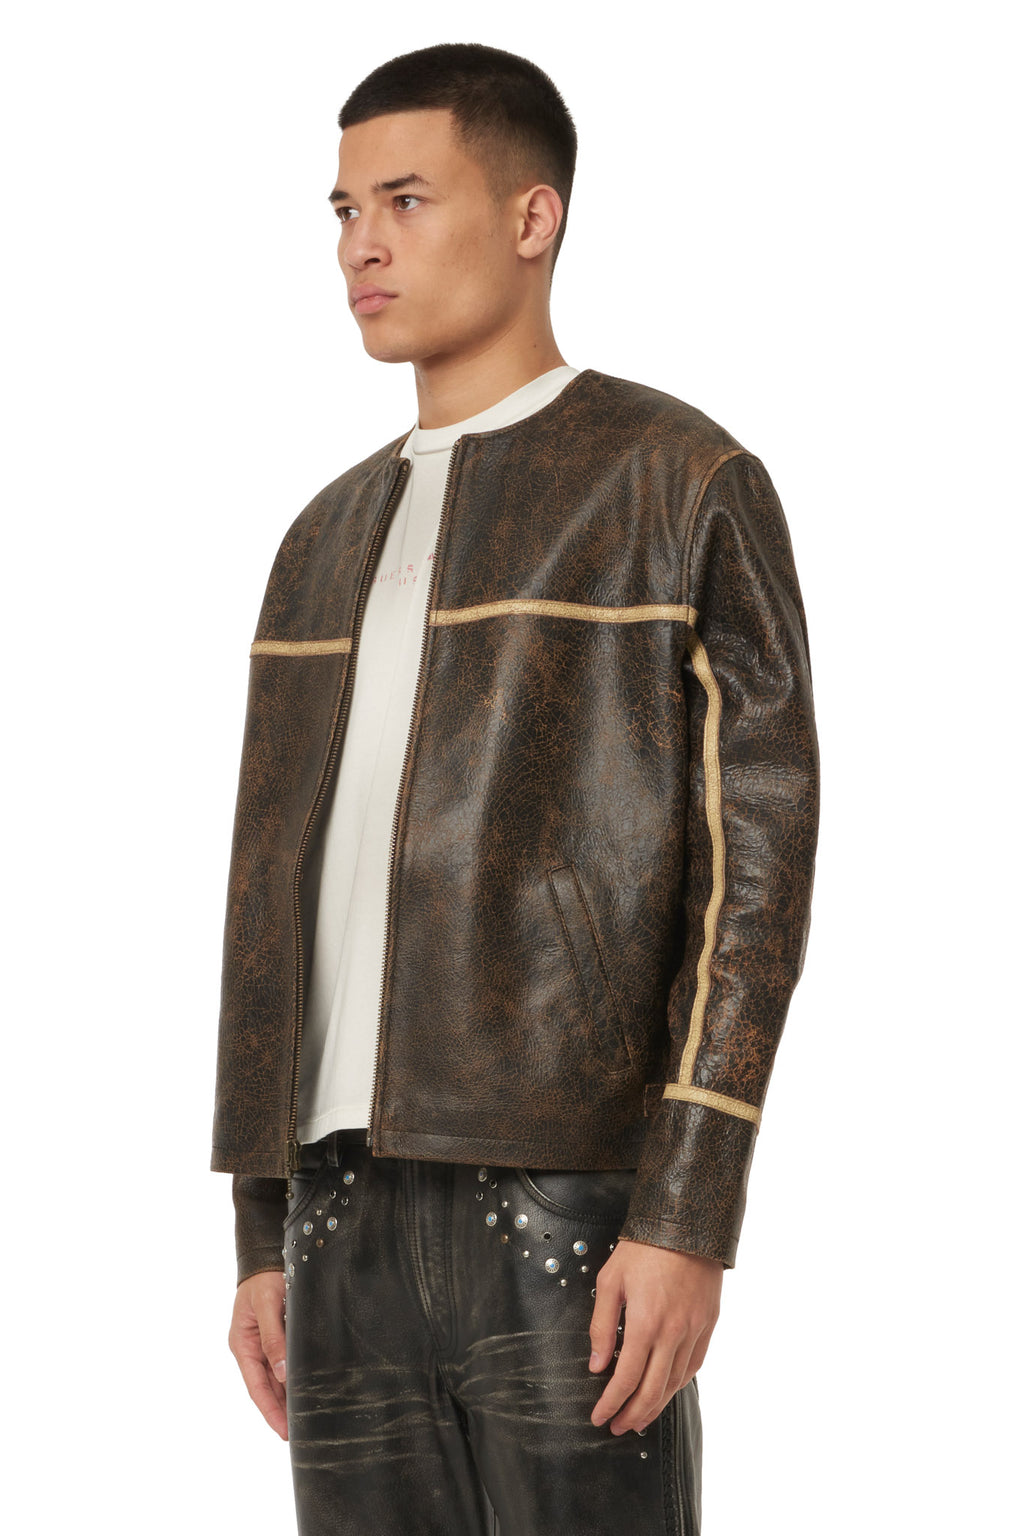 GUESS USA Crackle Leather Jacket